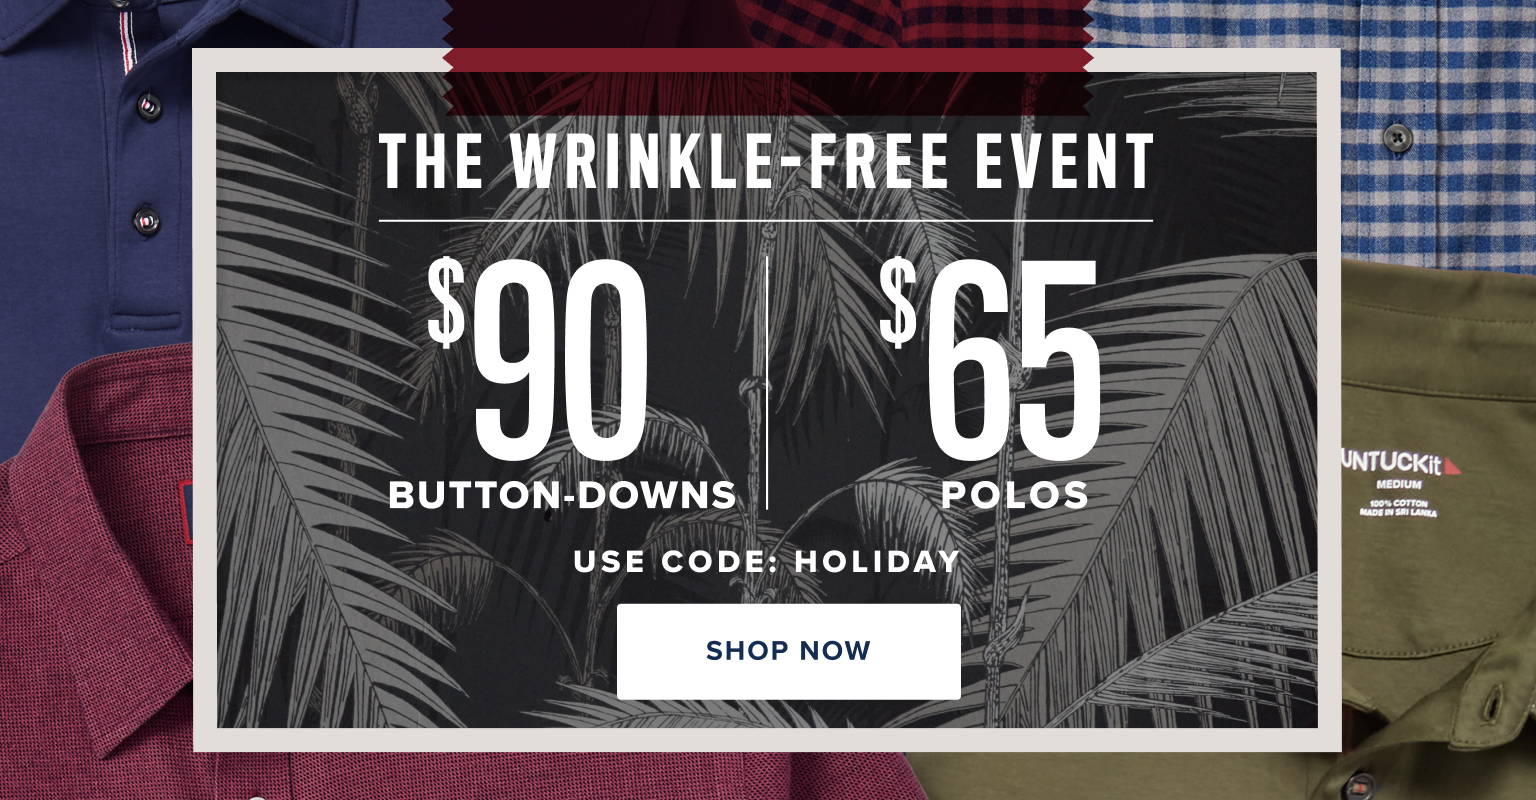 Wrinkle Free Event. $90 Button-downs and $65 Polos with code HOLIDAY.